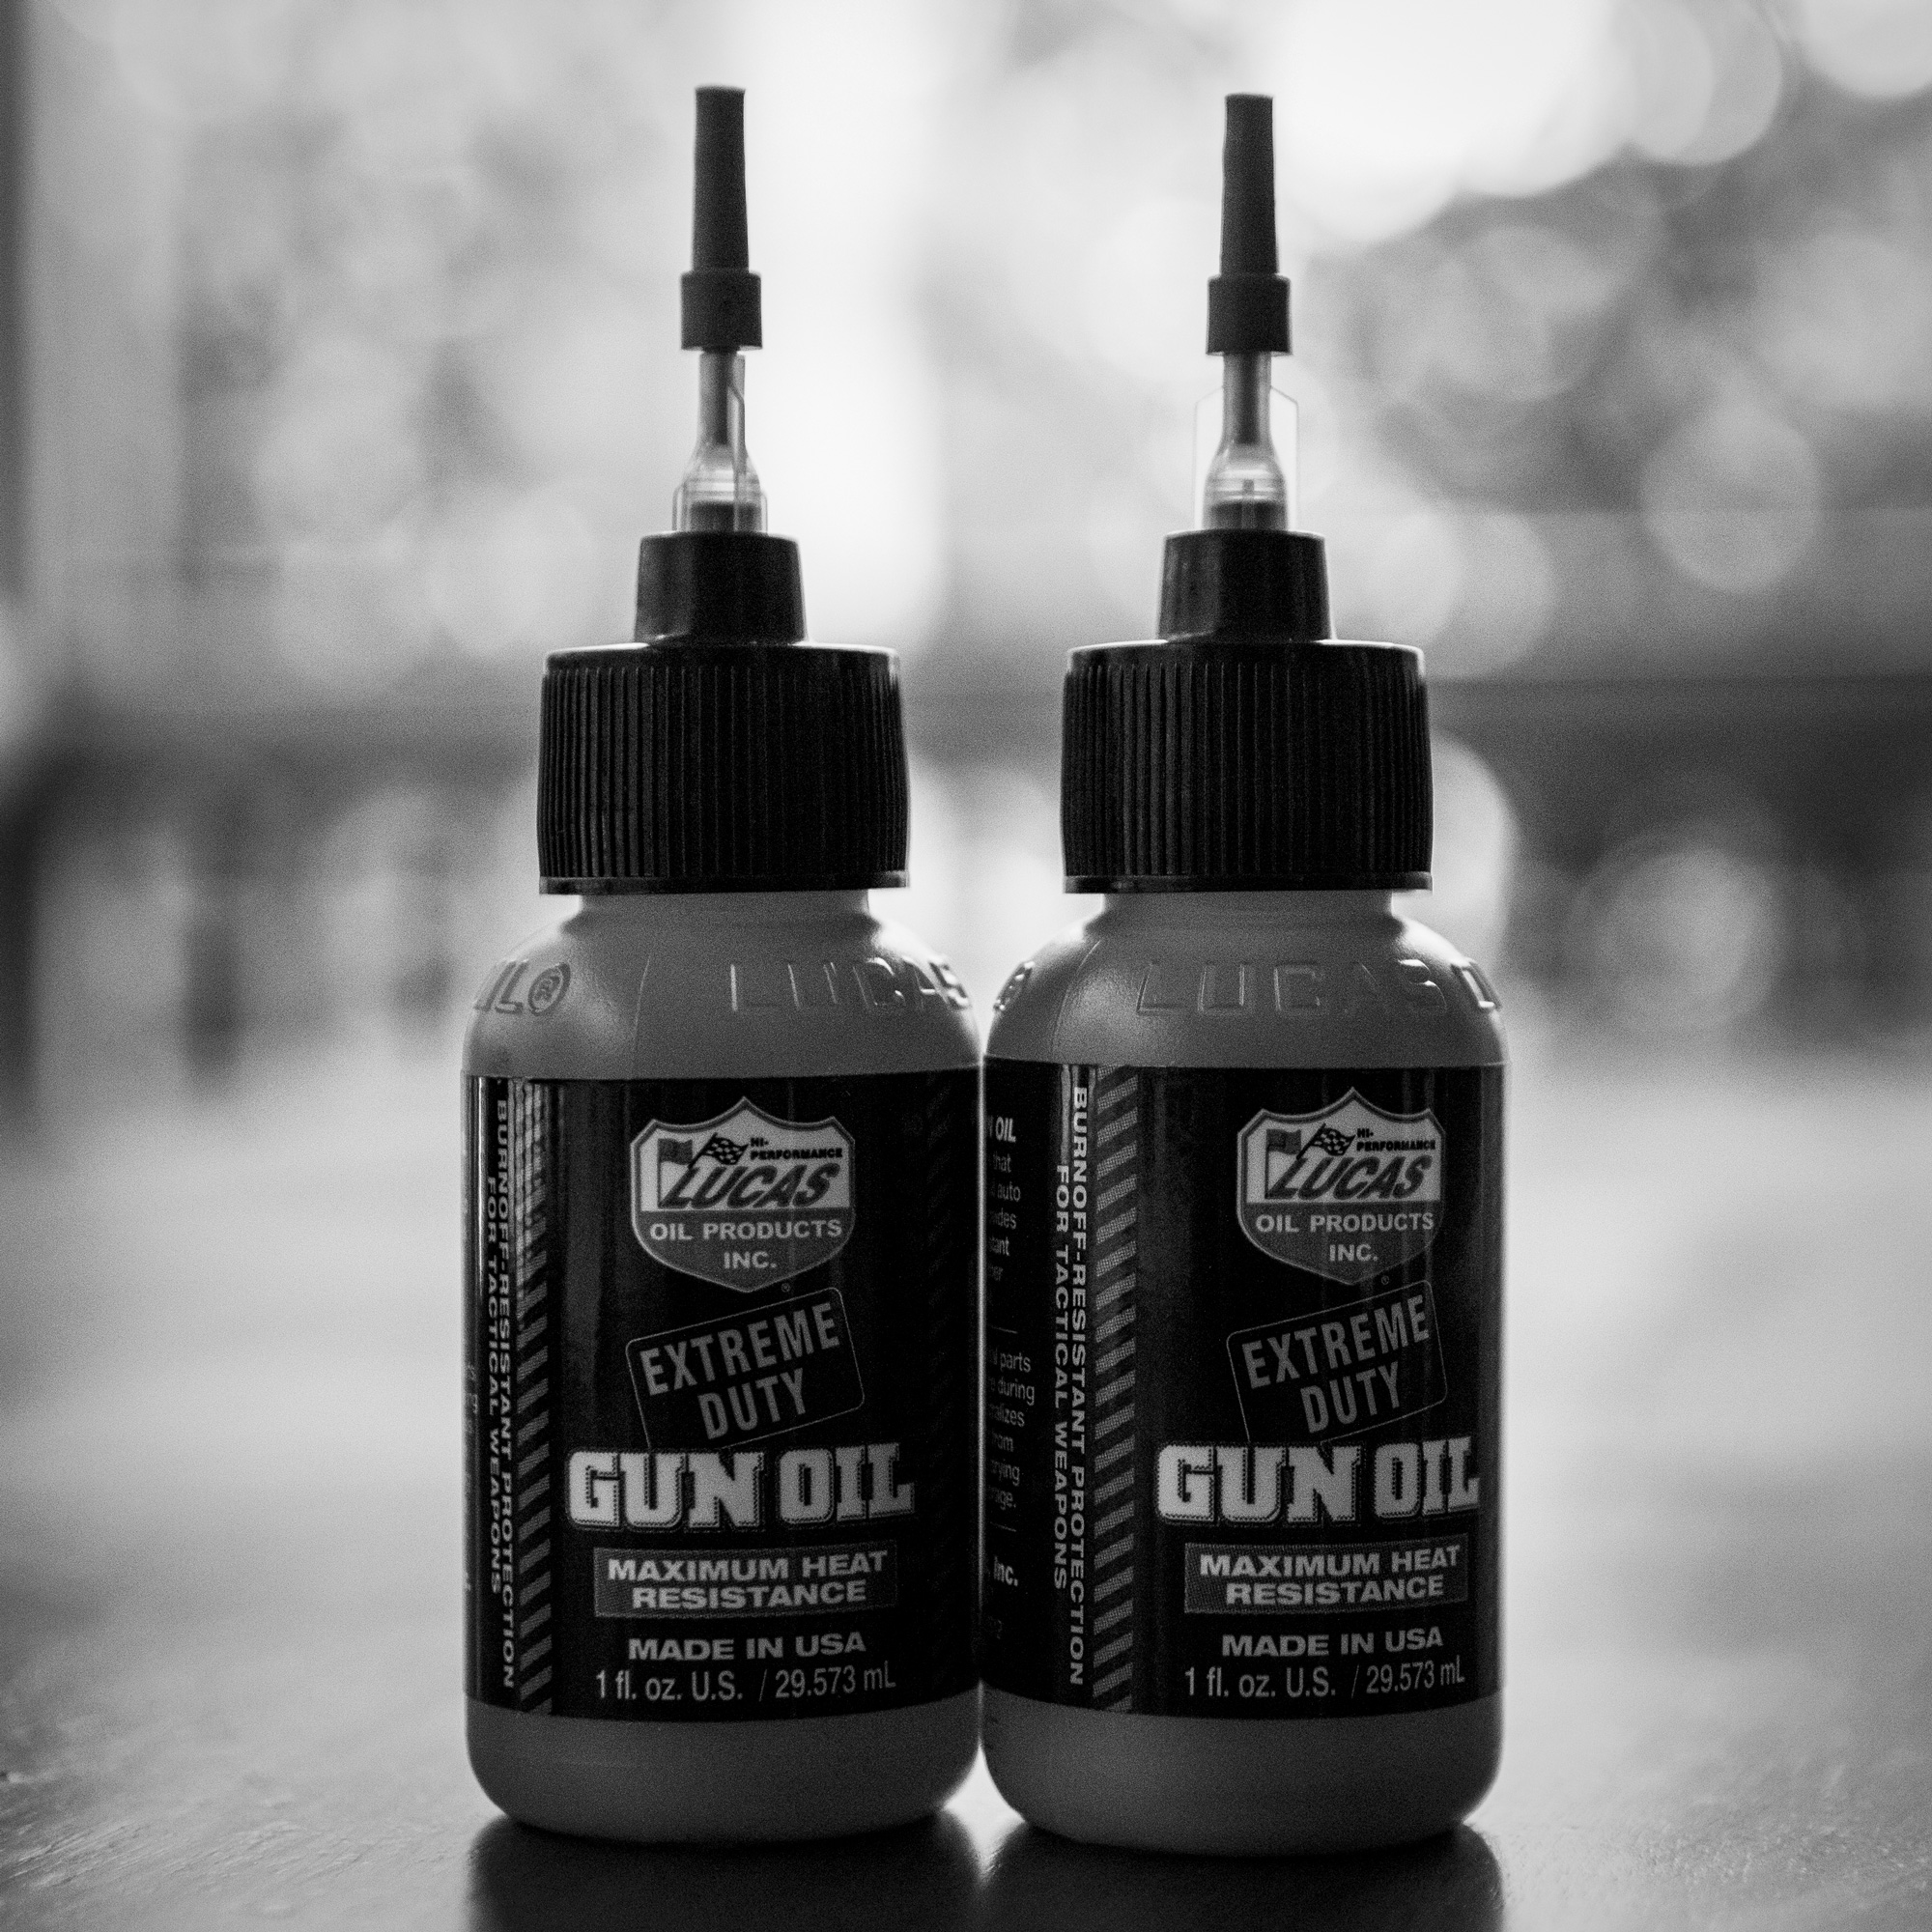 Best gun cleaning products for concealed carry